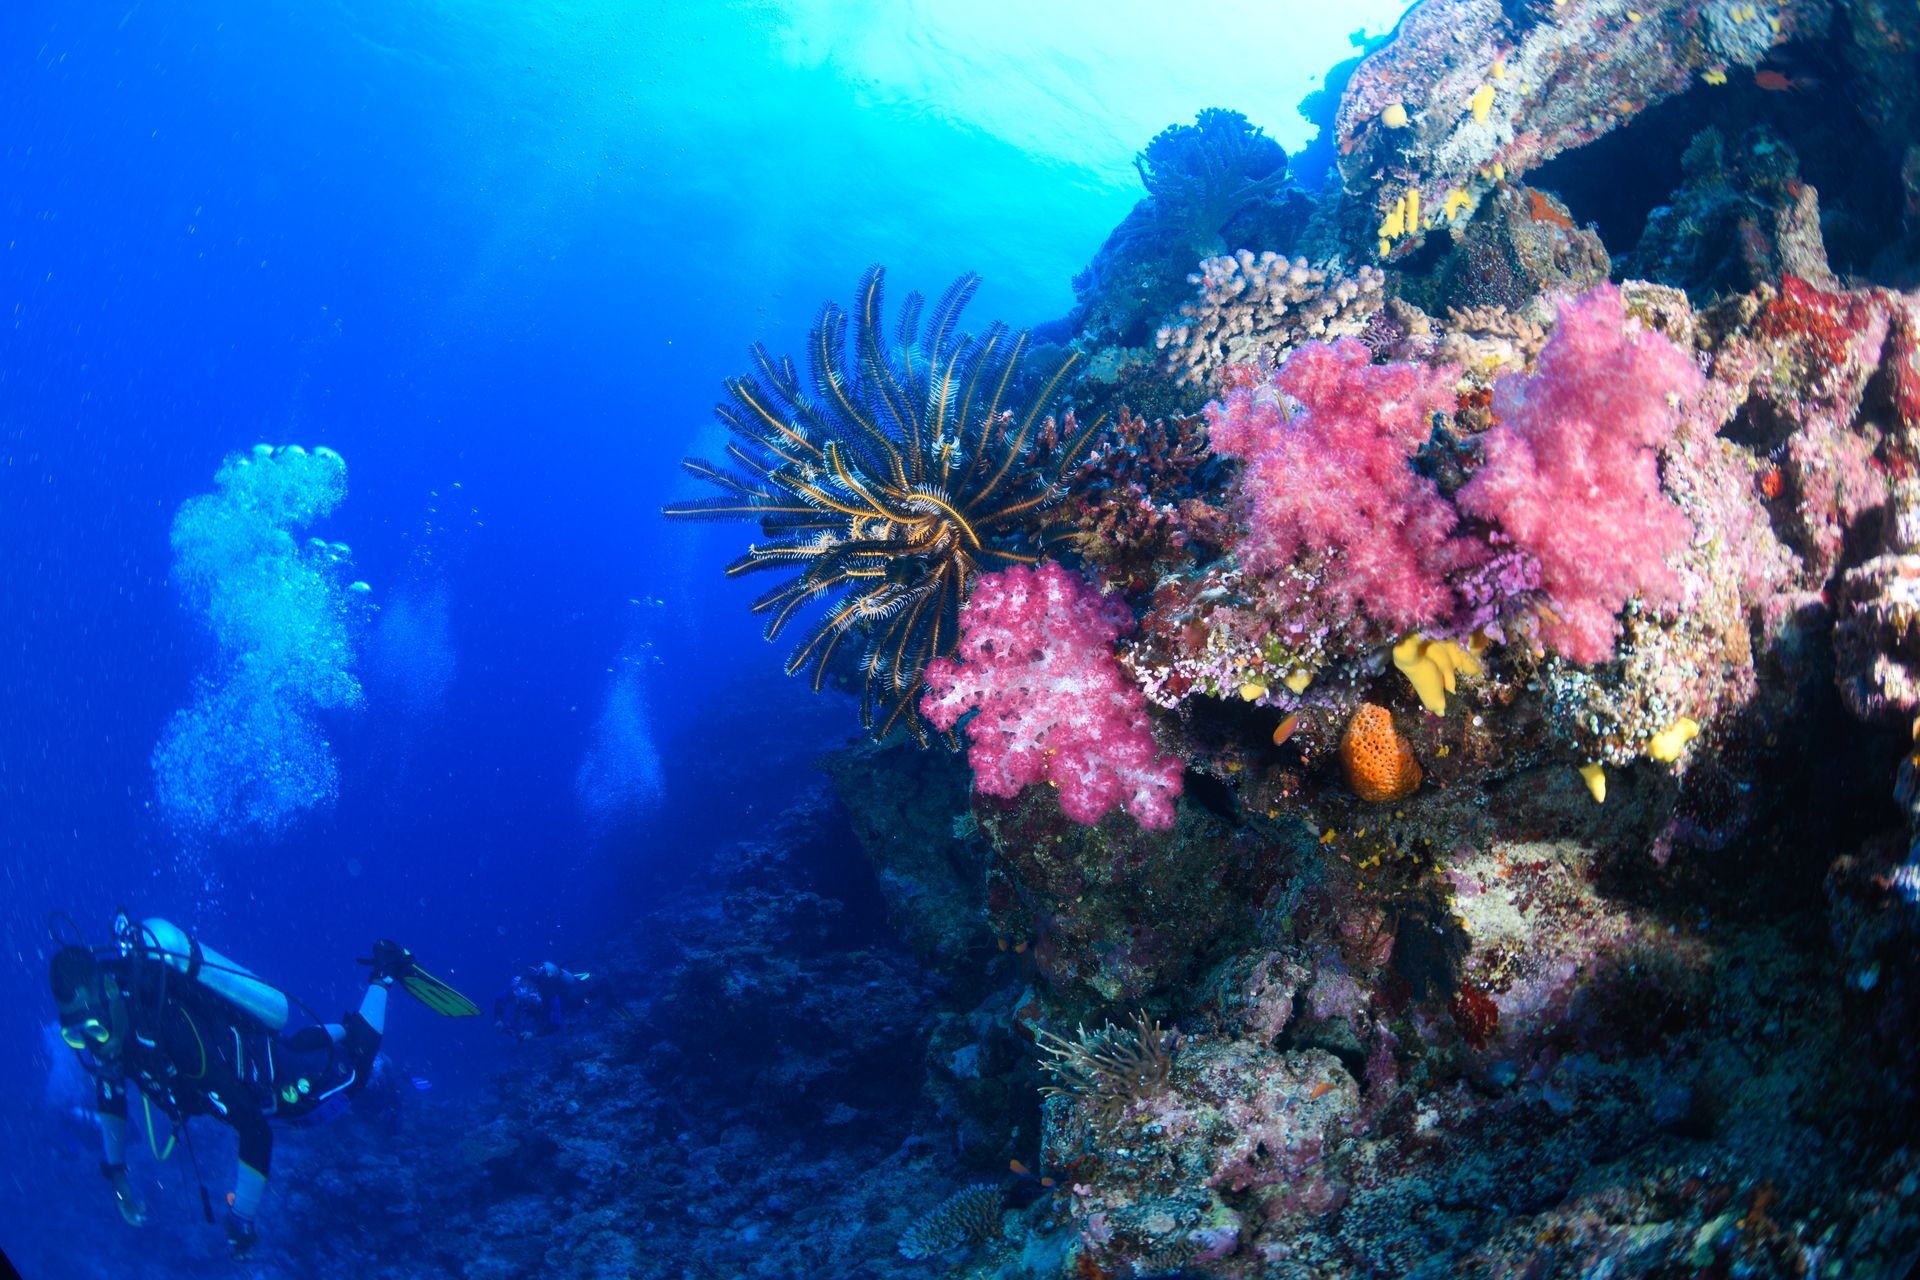 A diver exploring a pink soft coral decorated reef on the Great Astrolabe reef in Kadavu, Fiji 